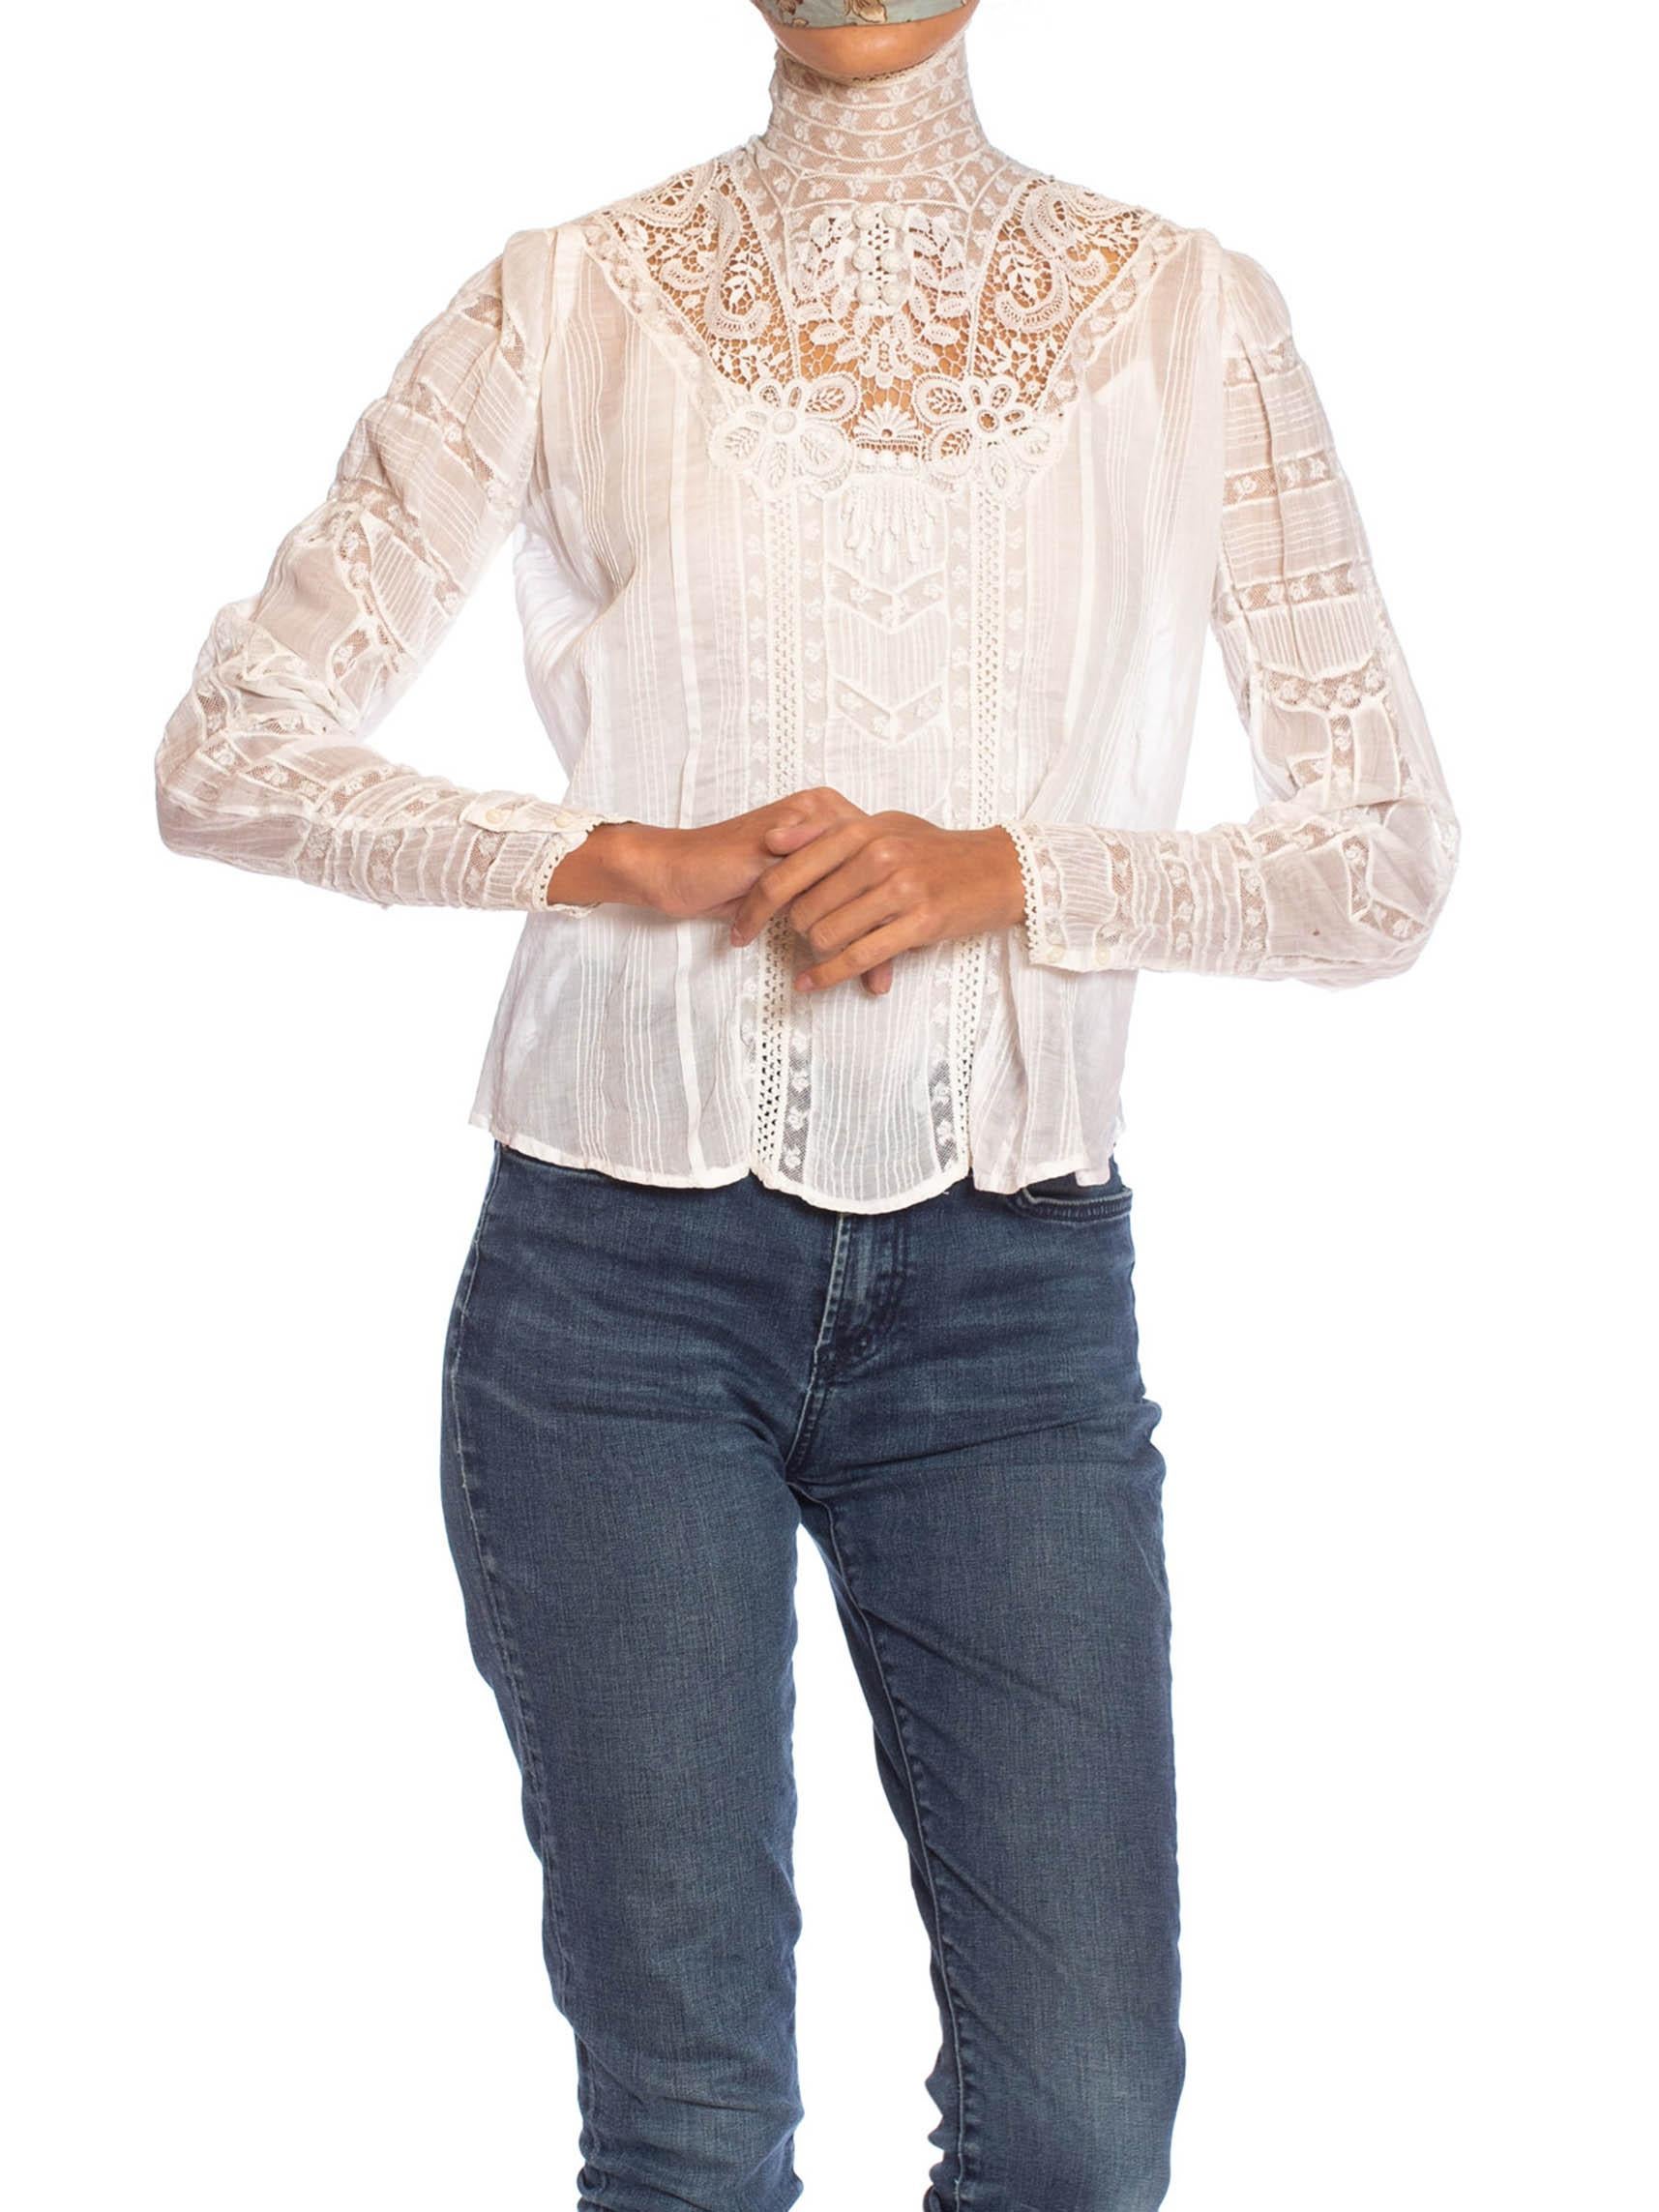 Women's Victorian White Organic Cotton Voile & Floral Lace Swan Neck Blouse With Irish 